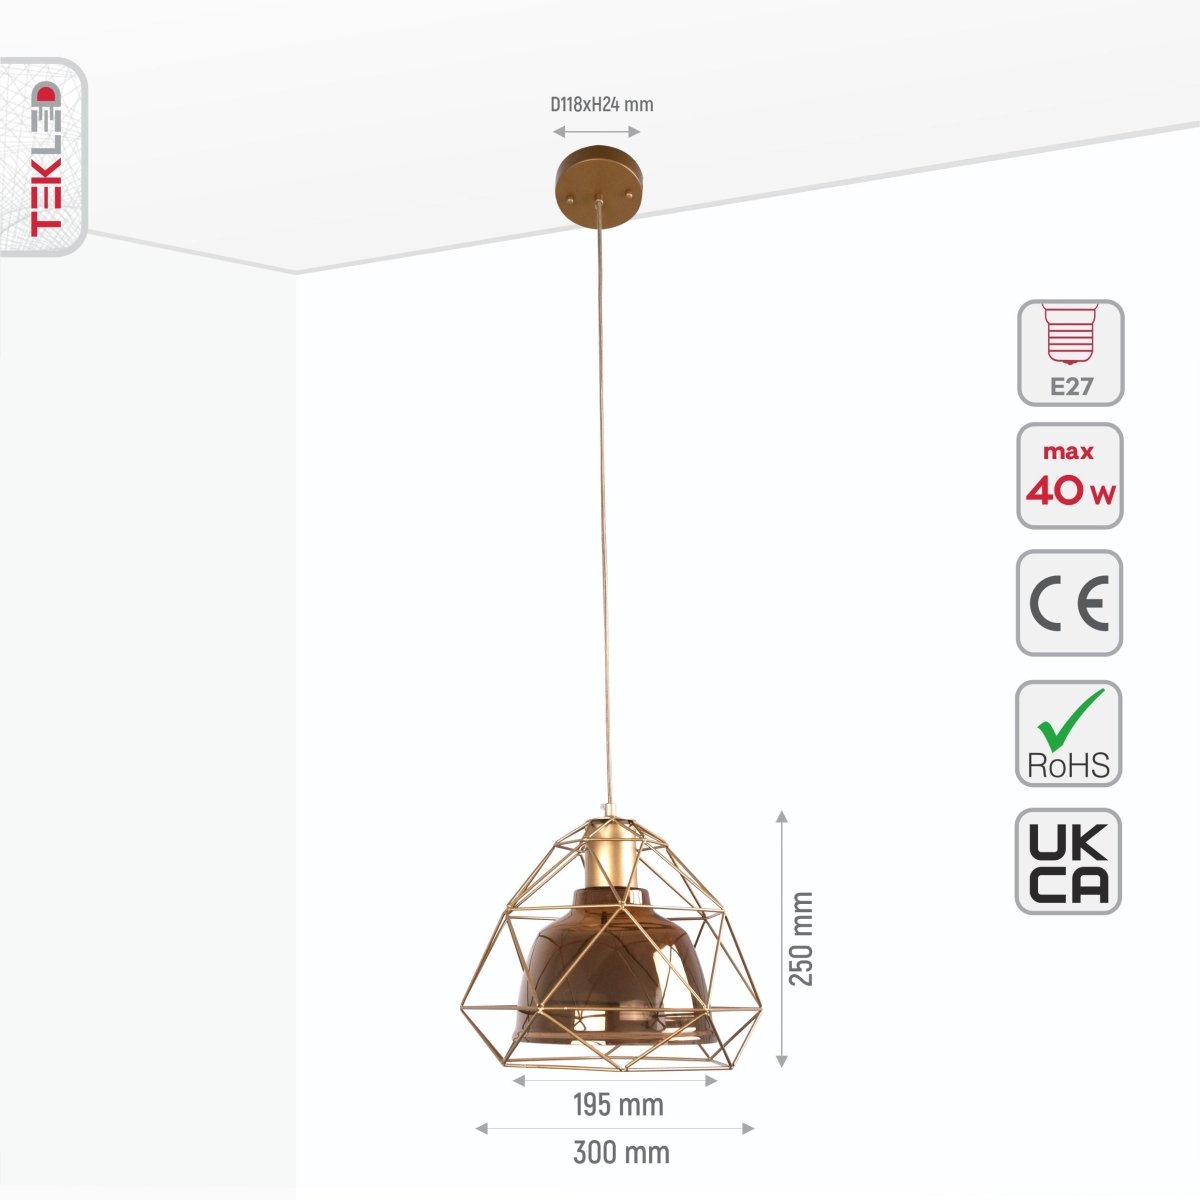 Size and specs of Copper Glass Dome Gold Metal Cage Pendant Light with E27 Fitting | TEKLED 156-19478